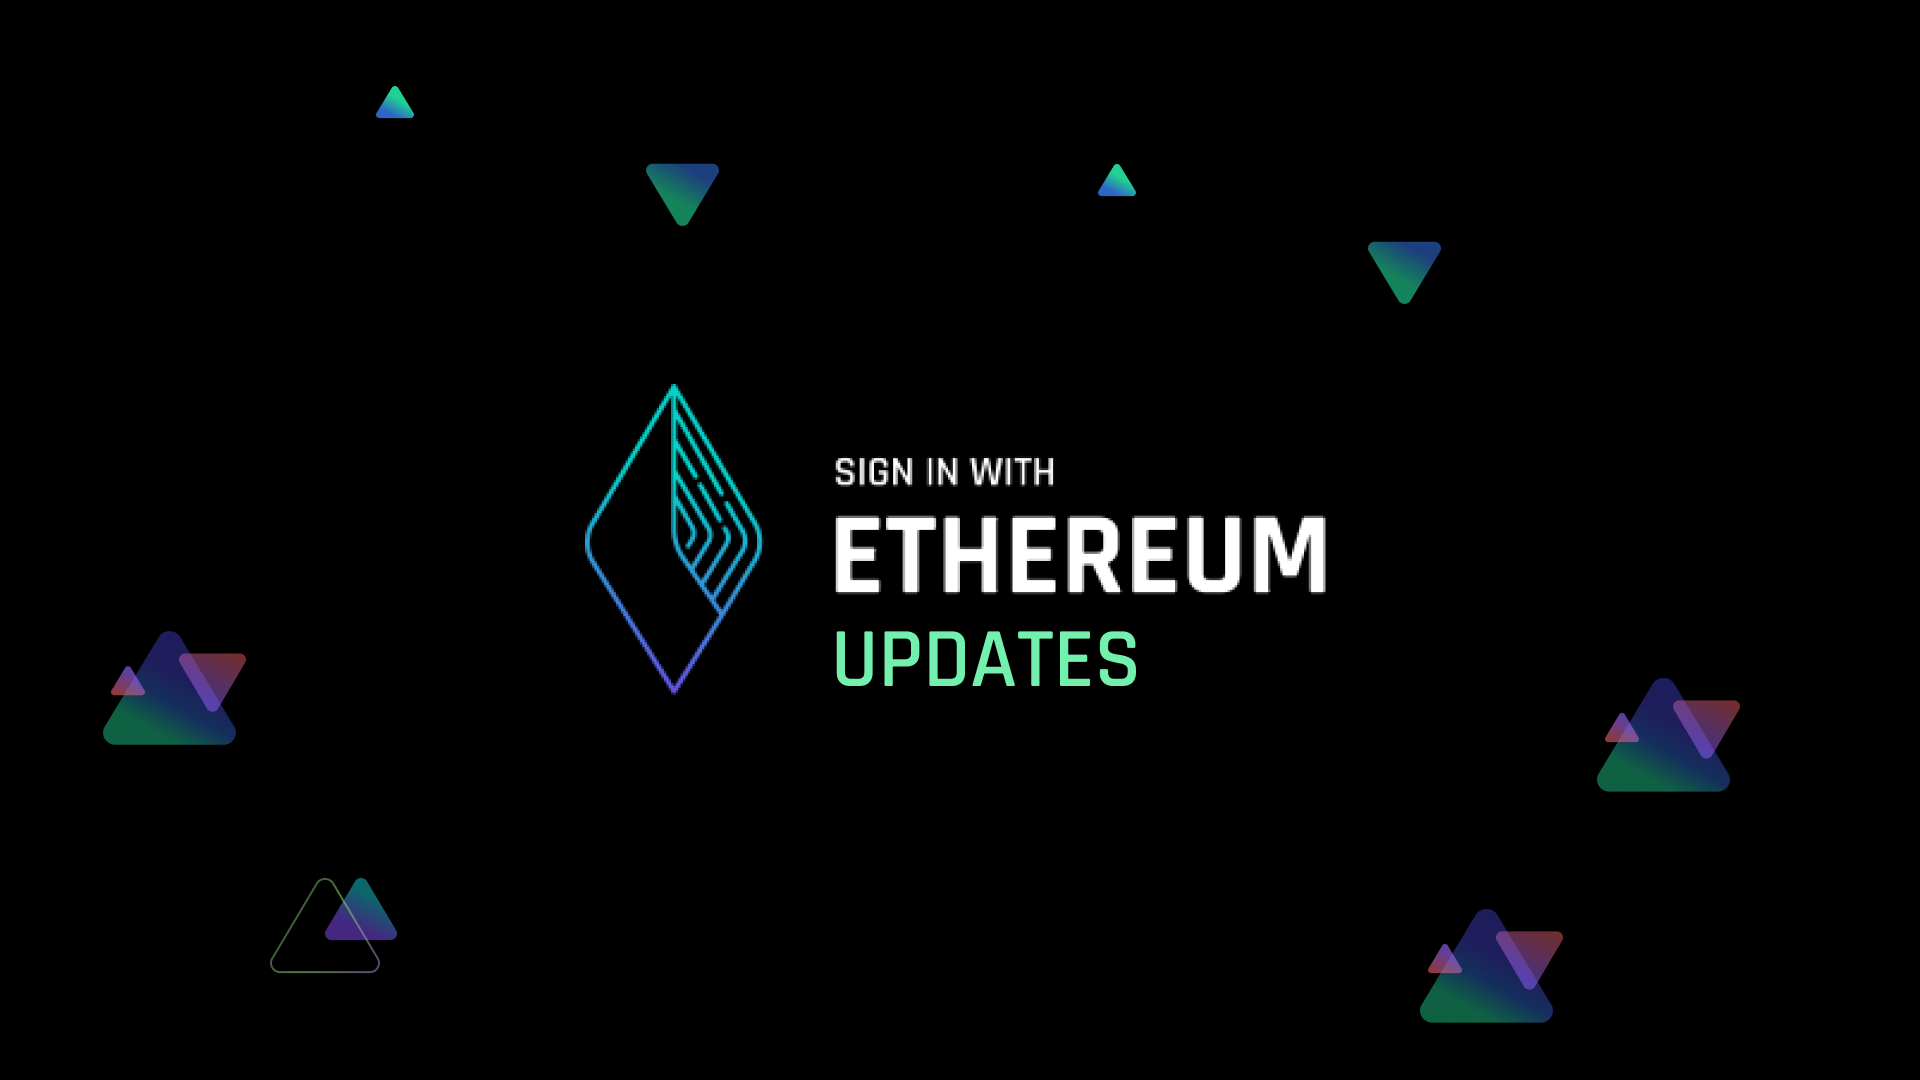 Sign-In with Ethereum - February Updates